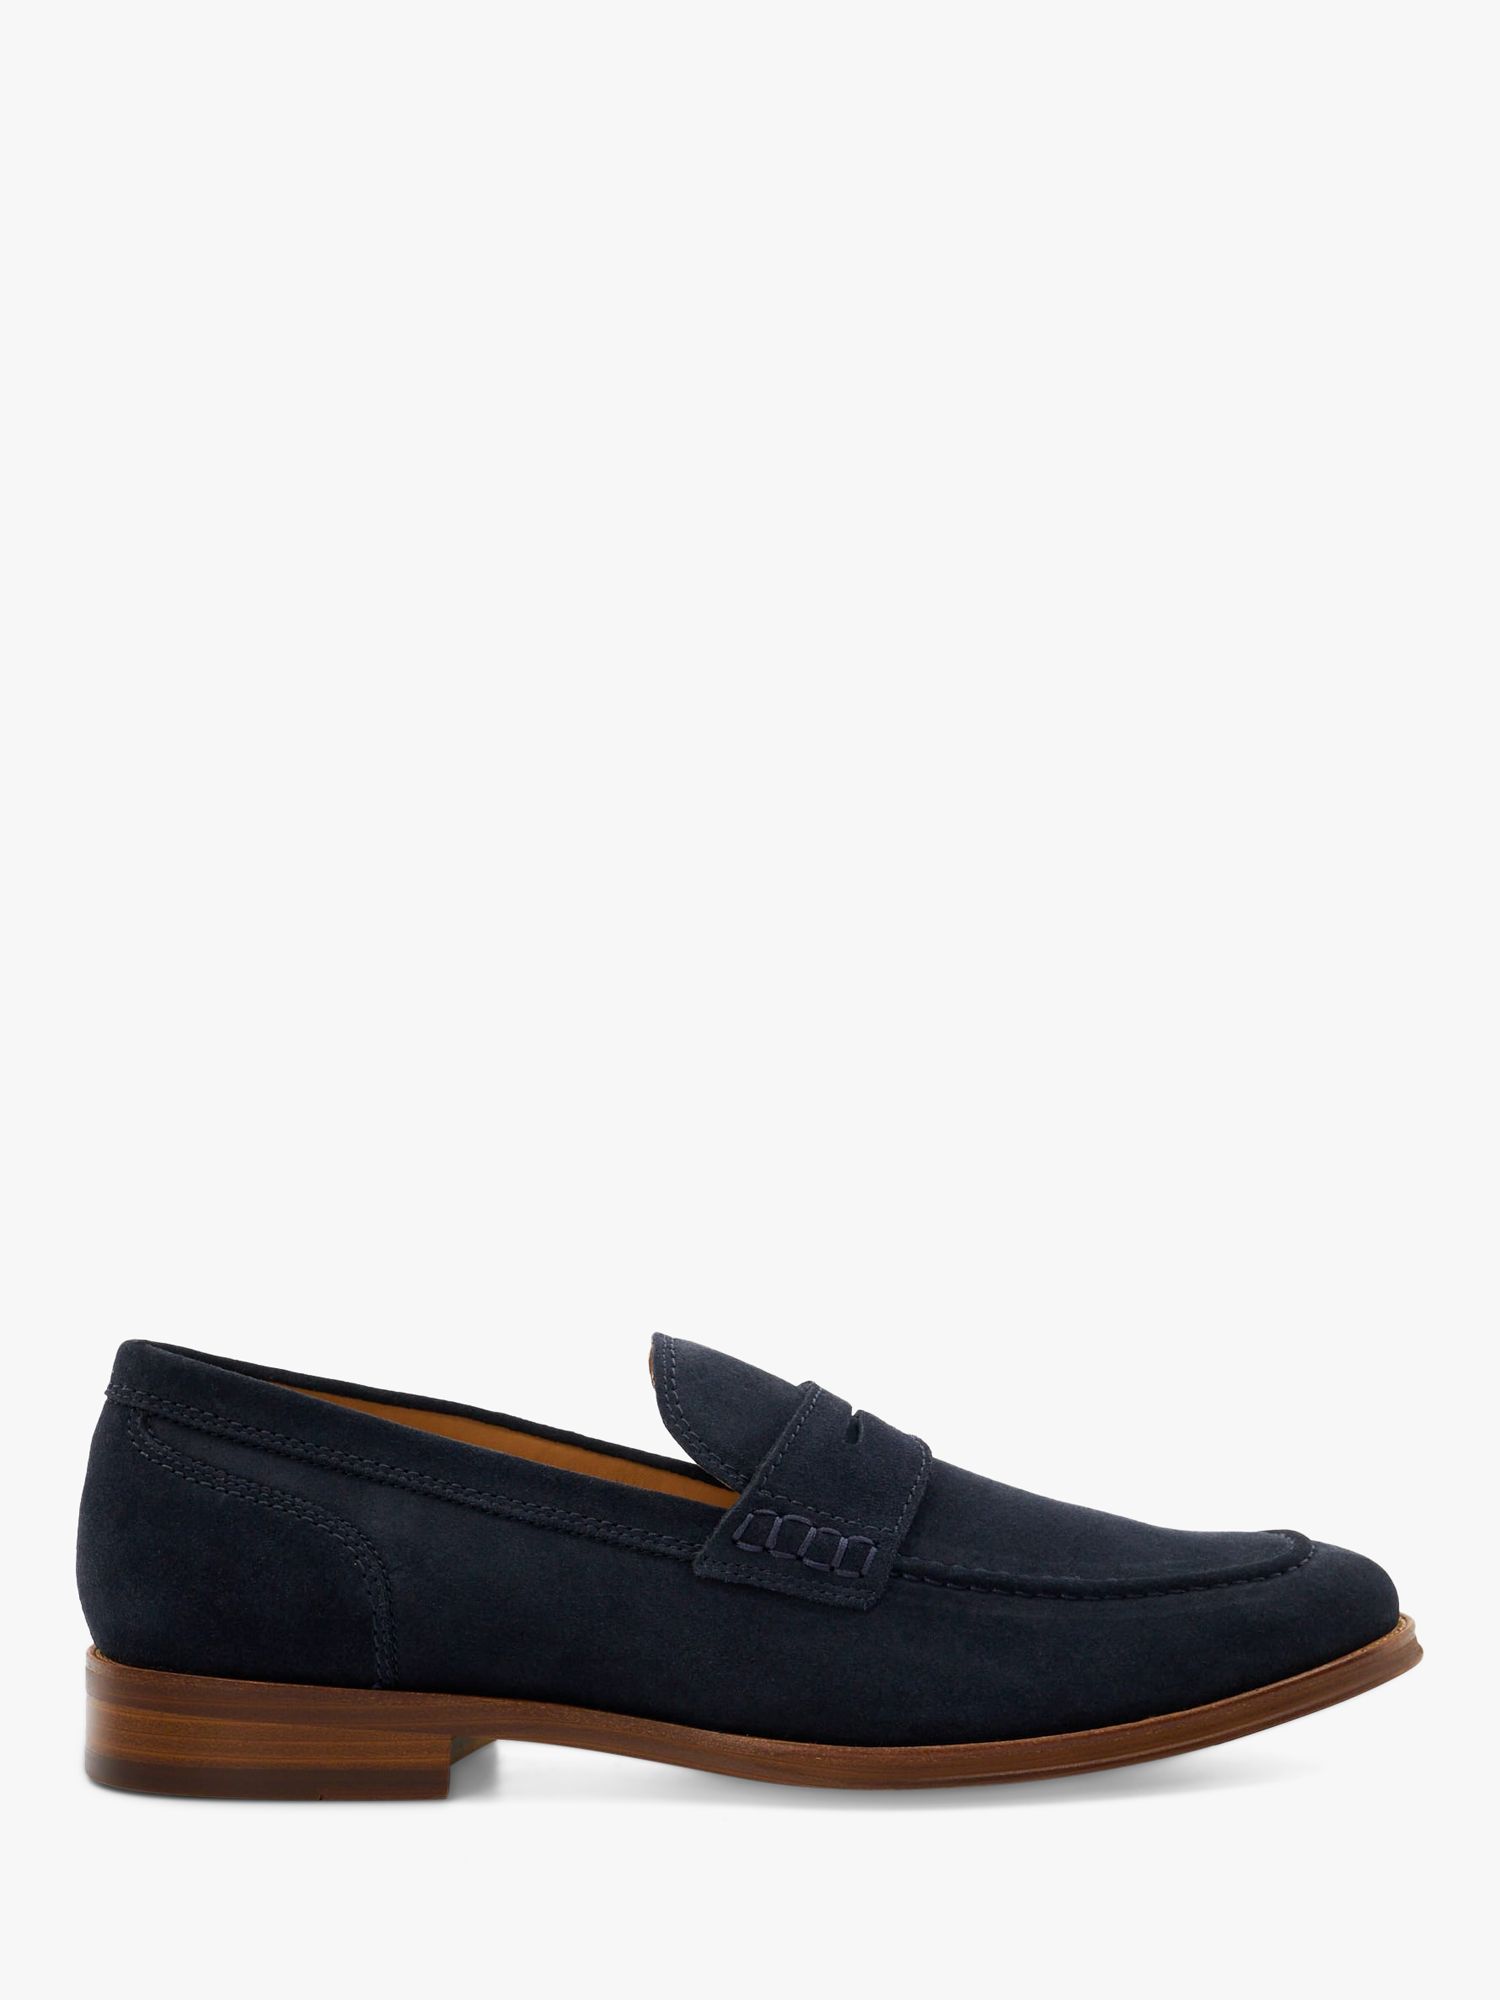 Dune Sulli Natural Sole Penny Loafers, Navy, 6